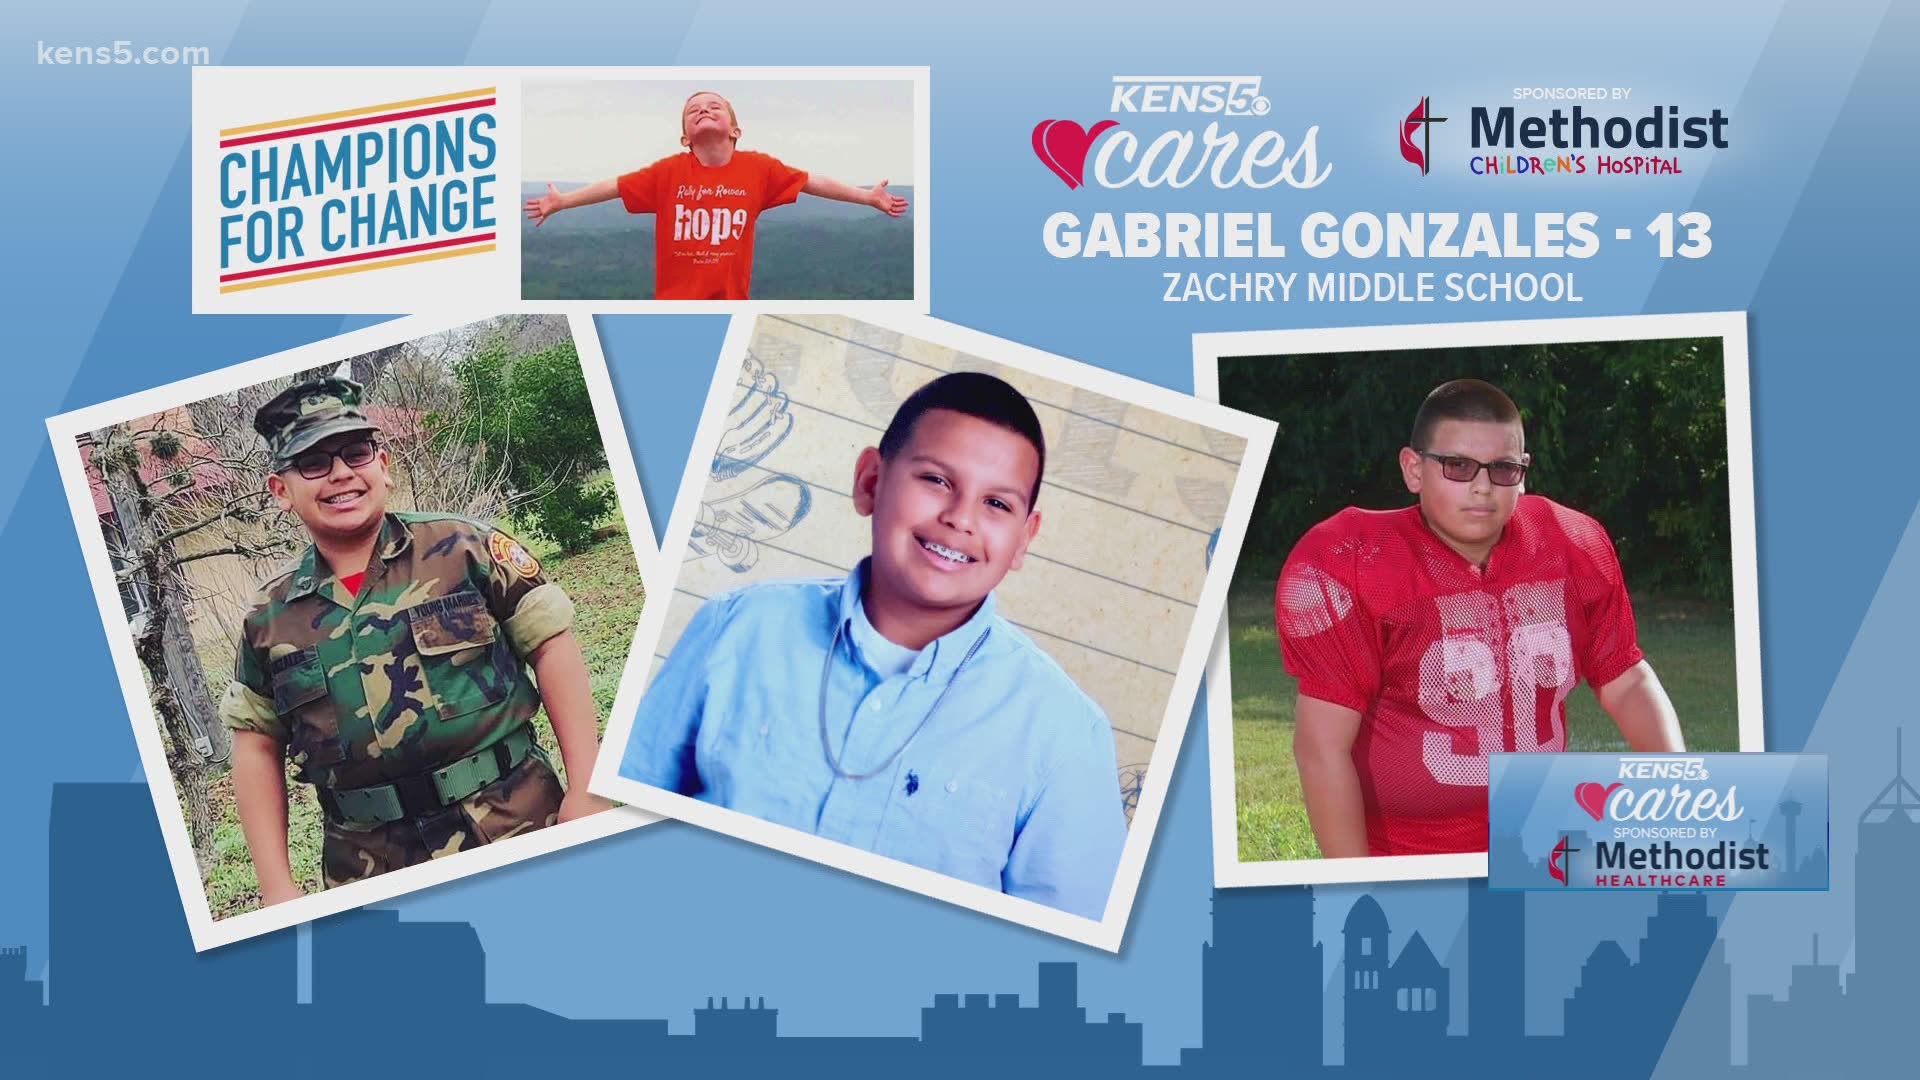 Champion for Change Gabriel Gonzales stood up to bullying and took action when a tragedy struck his school.